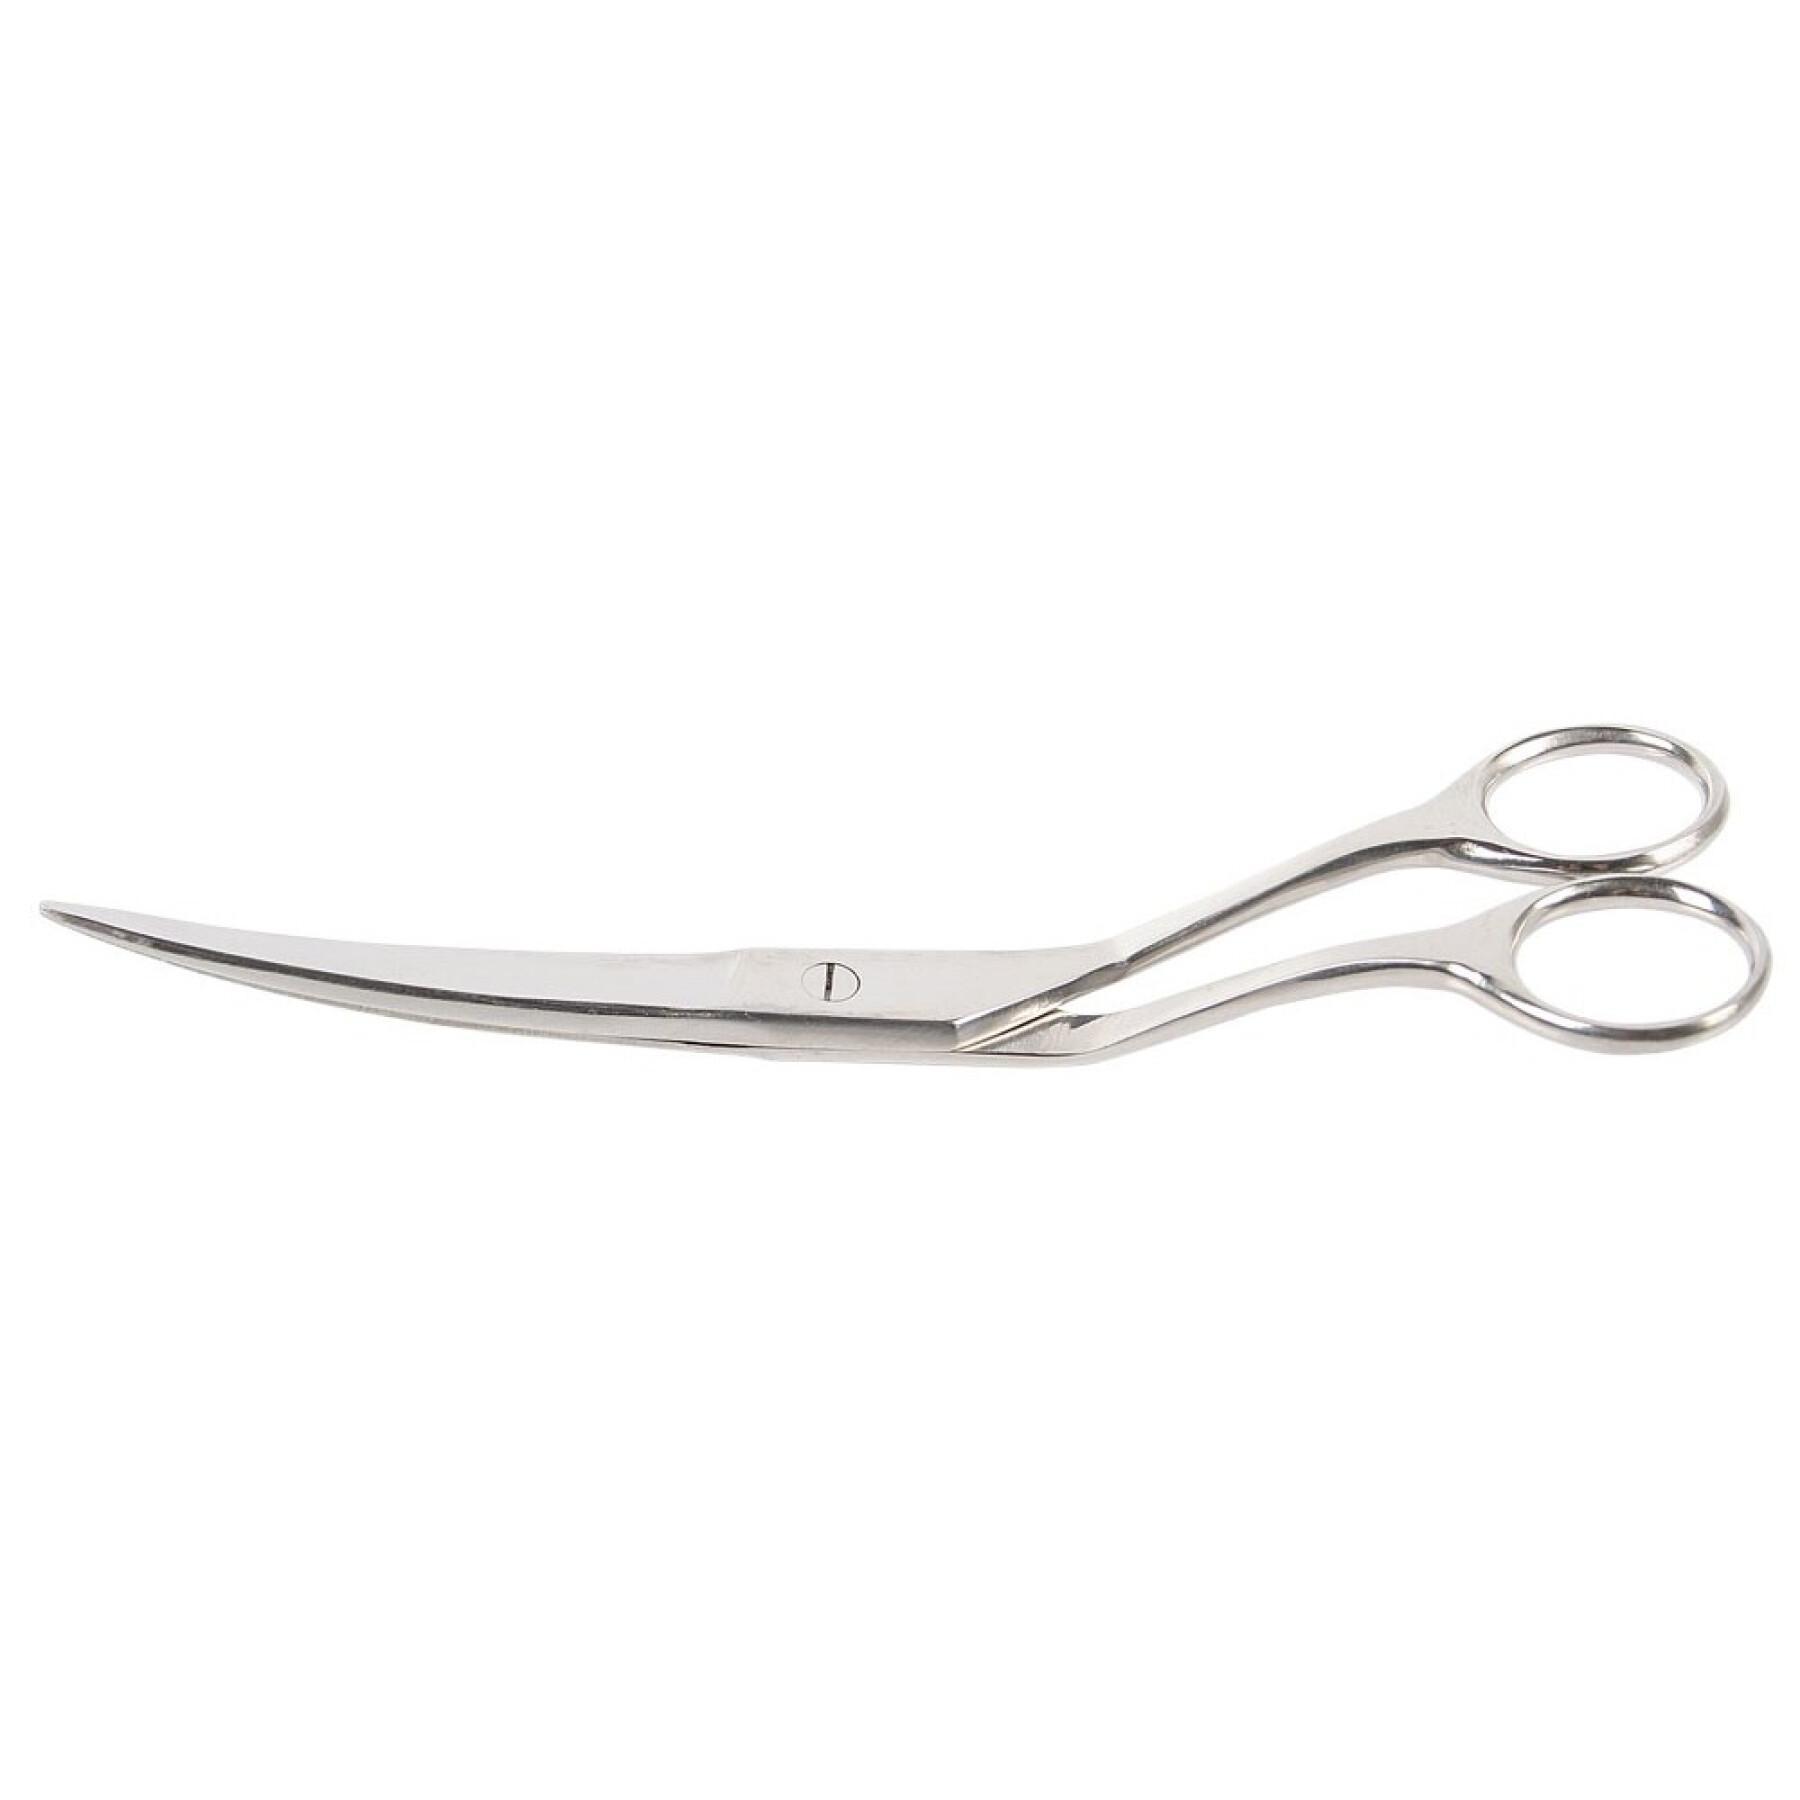 Curved grooming scissors Harry's Horse